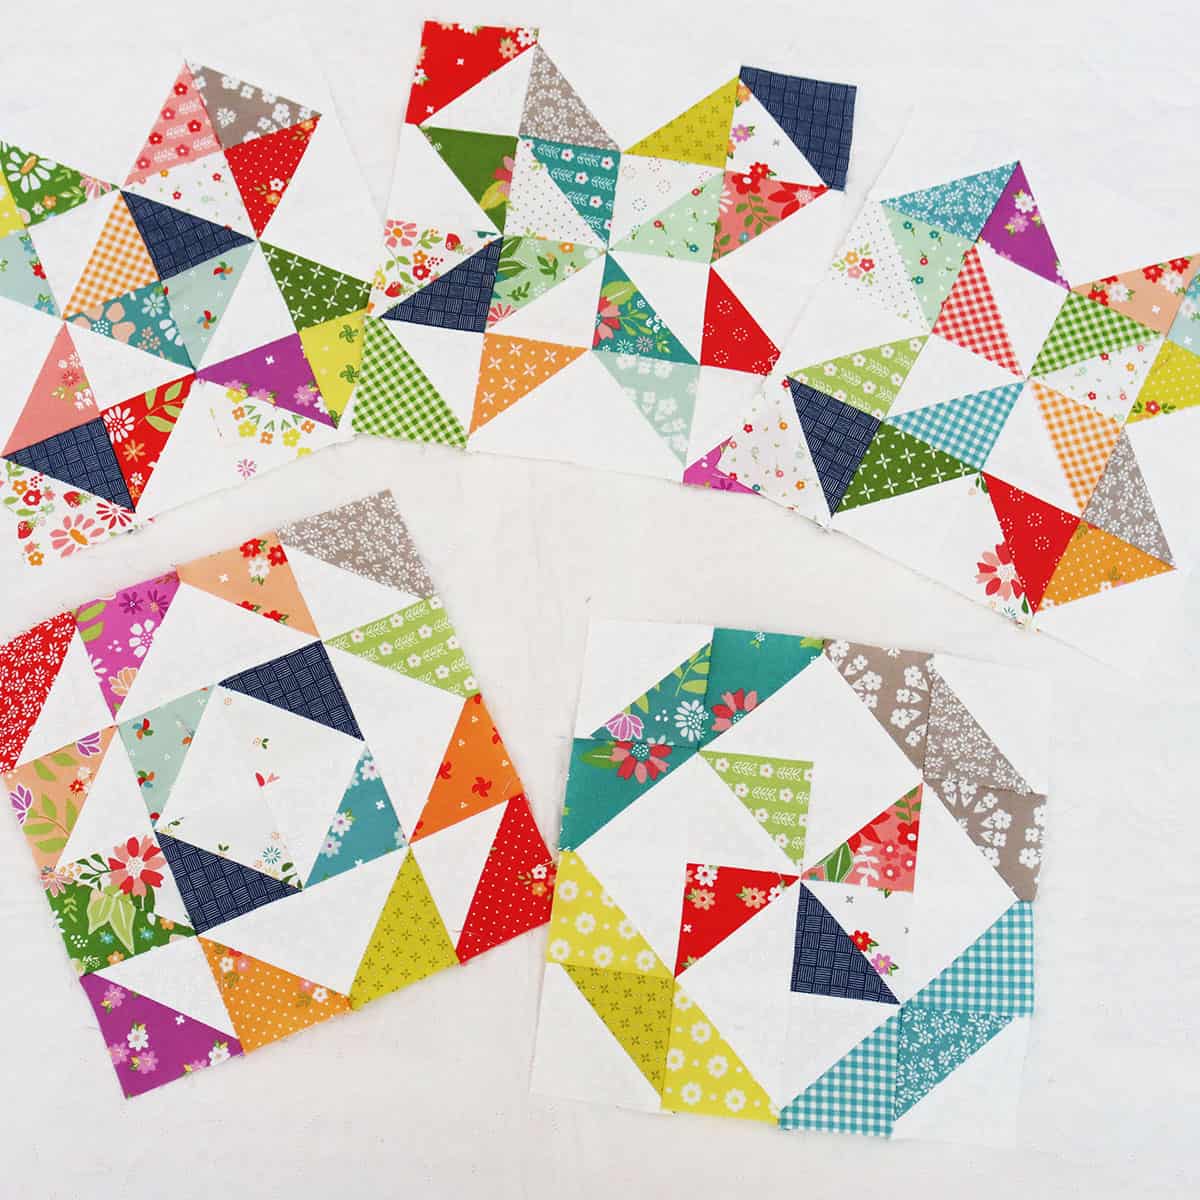 Colorful half square triangle quilt blocks by Sherri from A Quilting Life